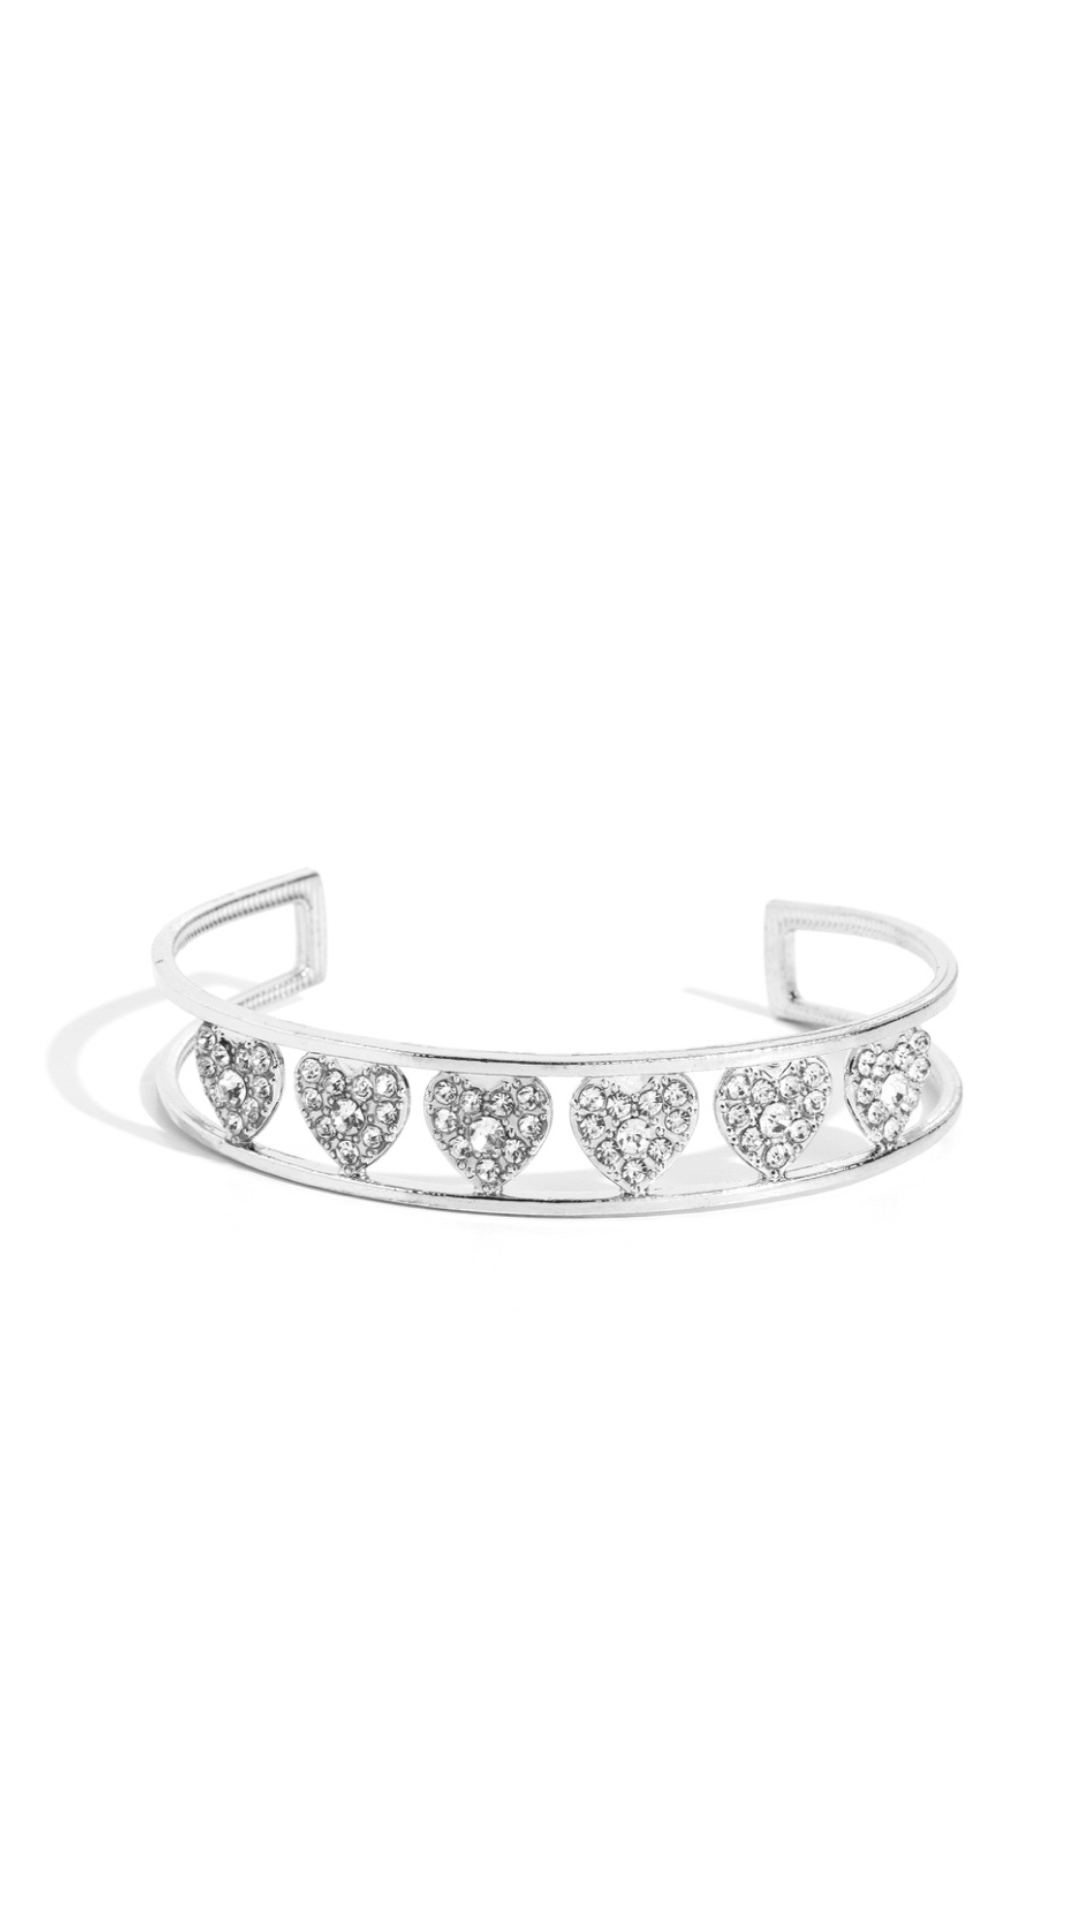 Queen of Hearts Bracelet - Twice the Charm